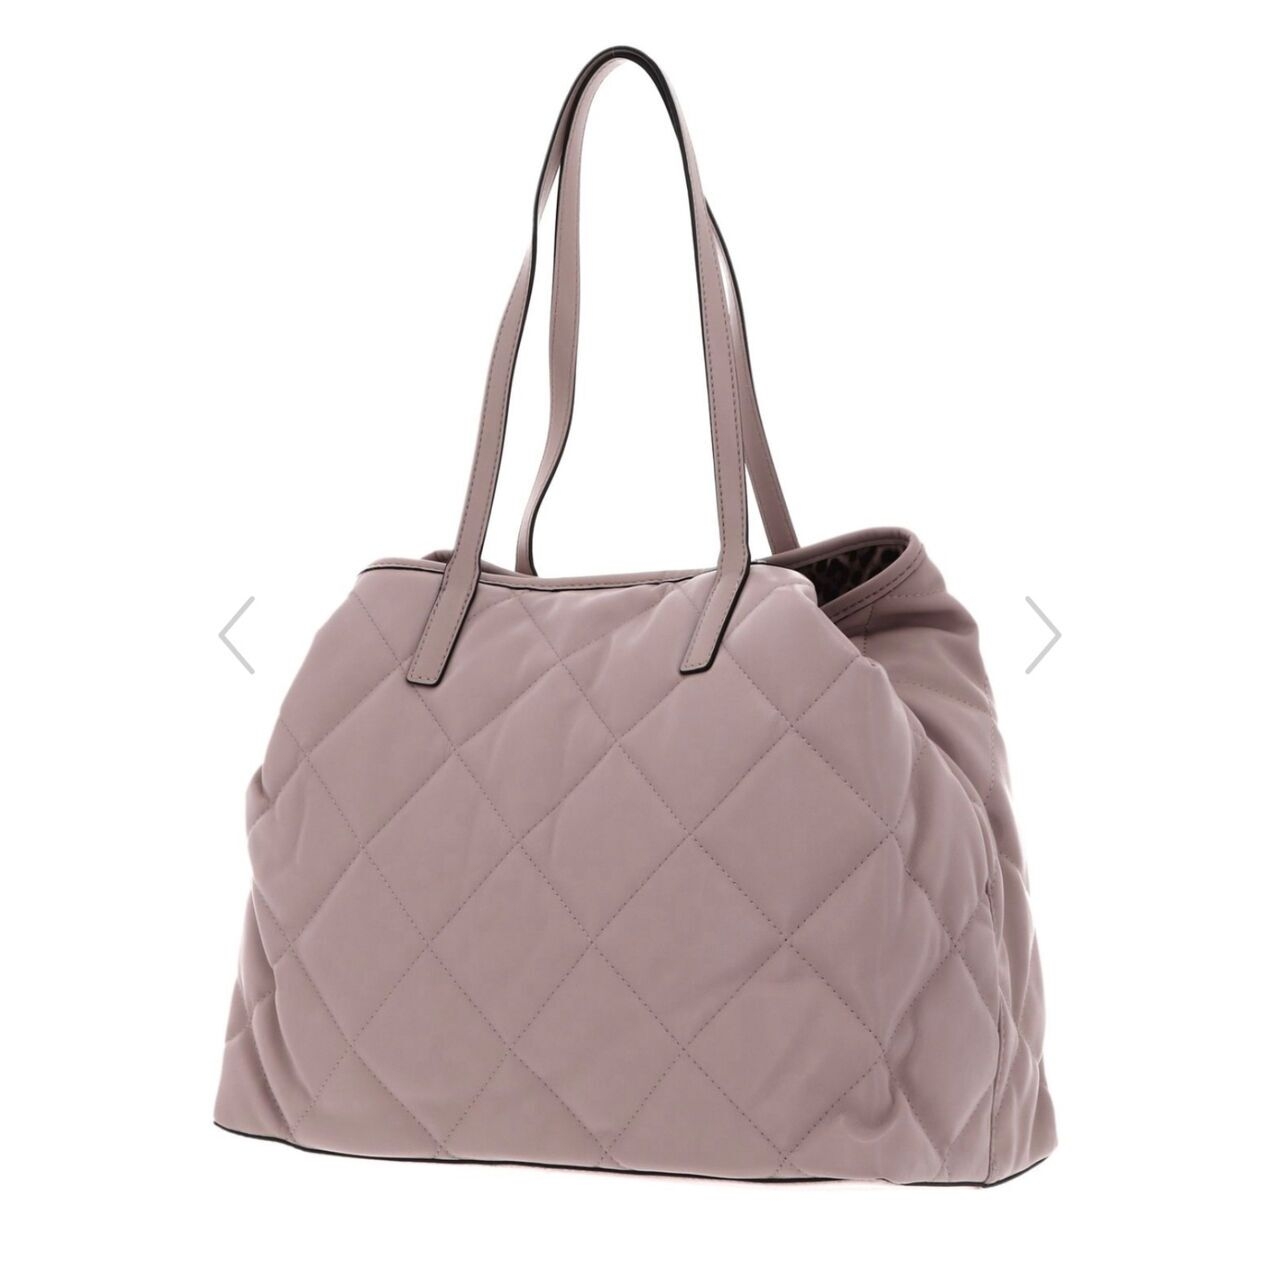 Guess Nude Vikky Tote Bag